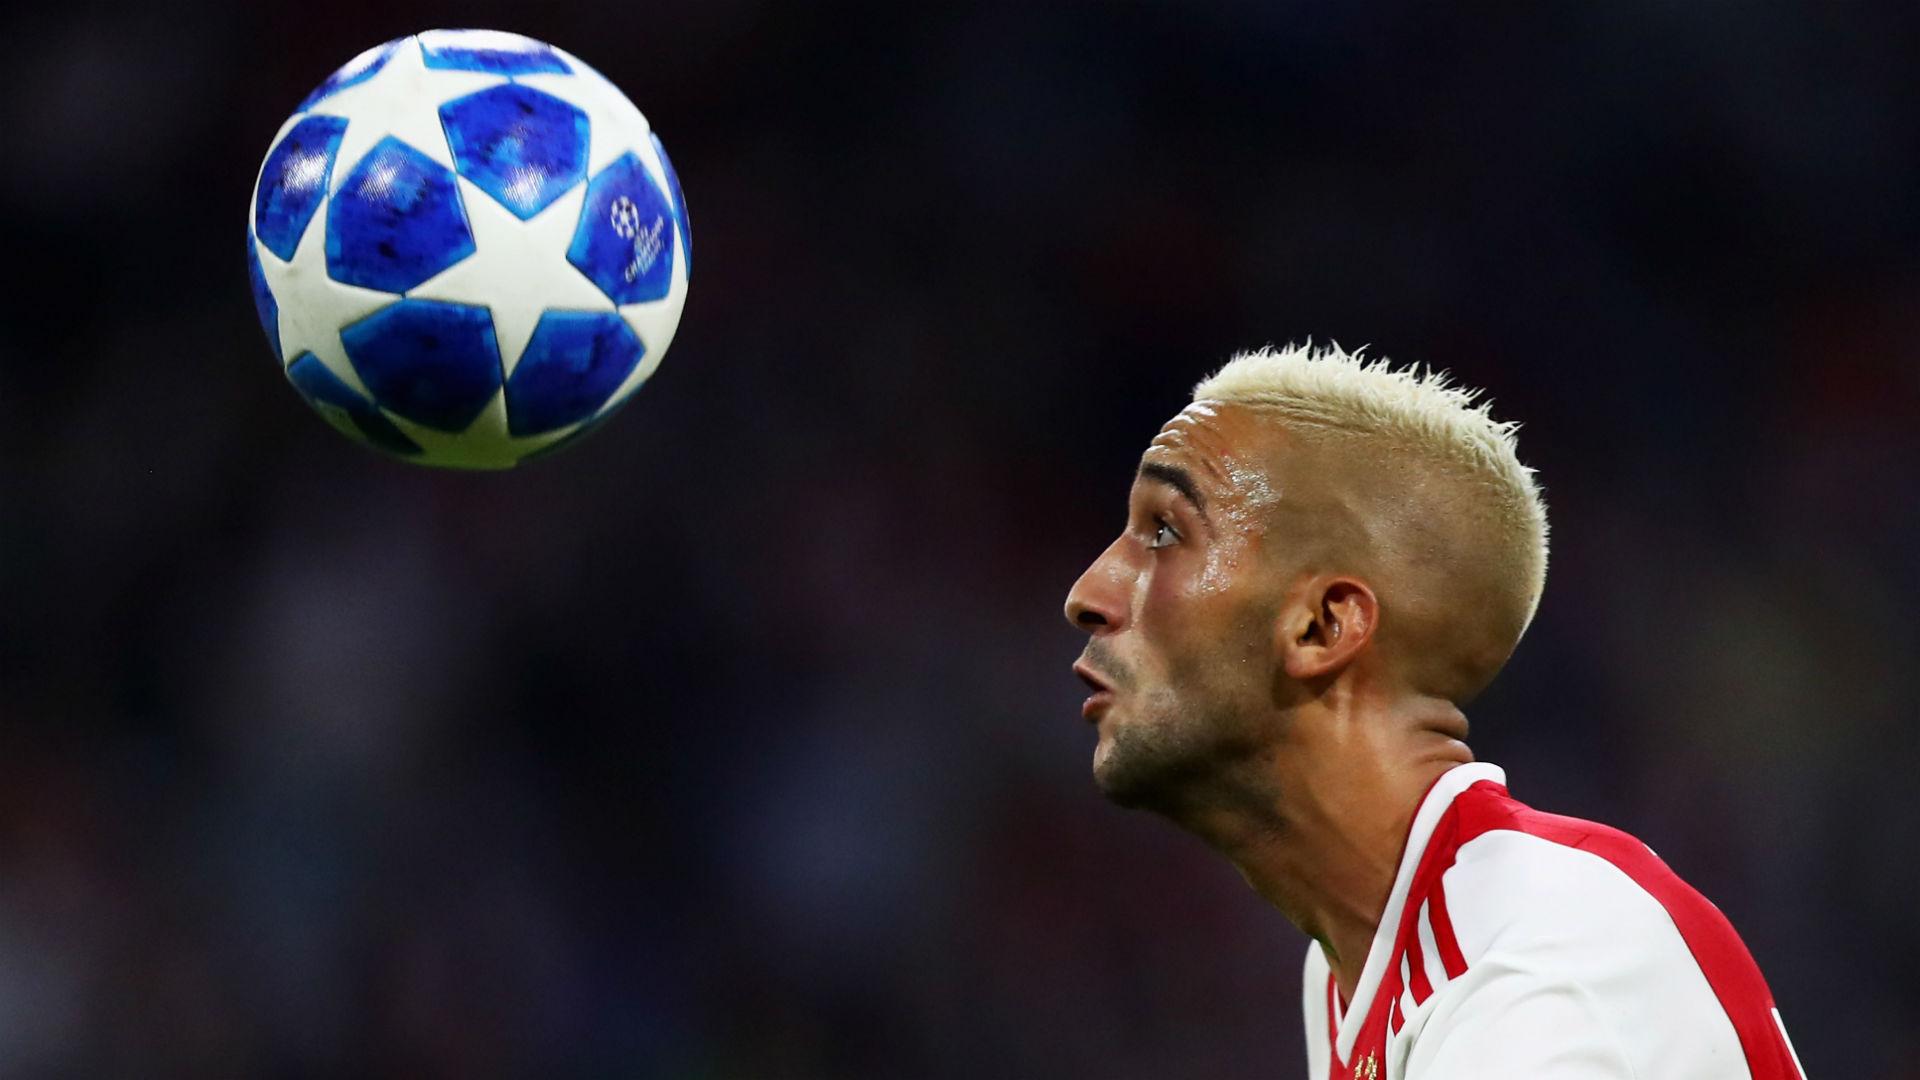 Did Hakim Ziyech show vs. Real Madrid prove he's ready for a big